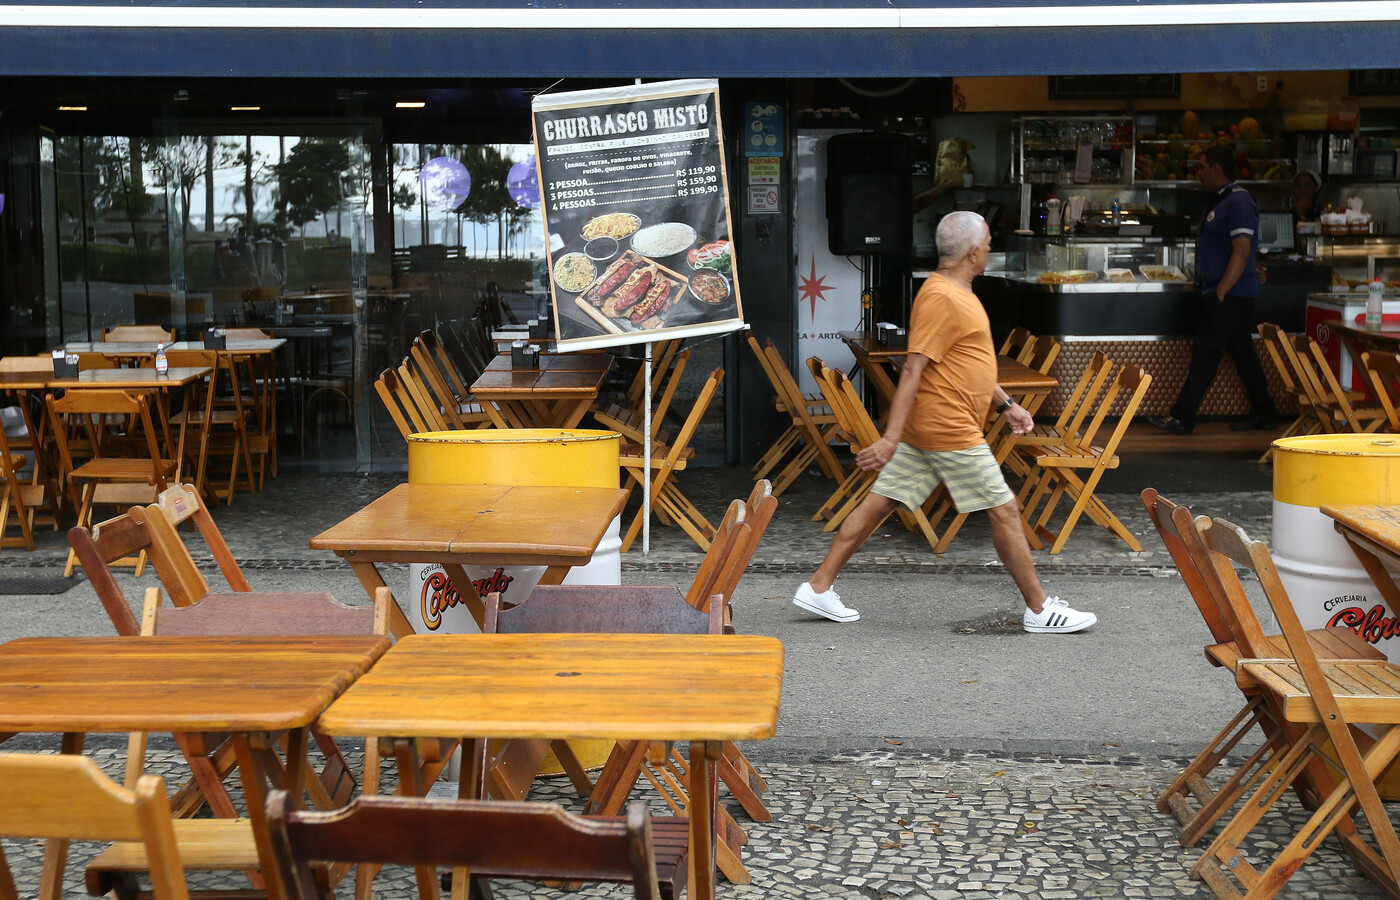 Inflation: Brazilians exchange full meals for snacks at lunchtime, says survey